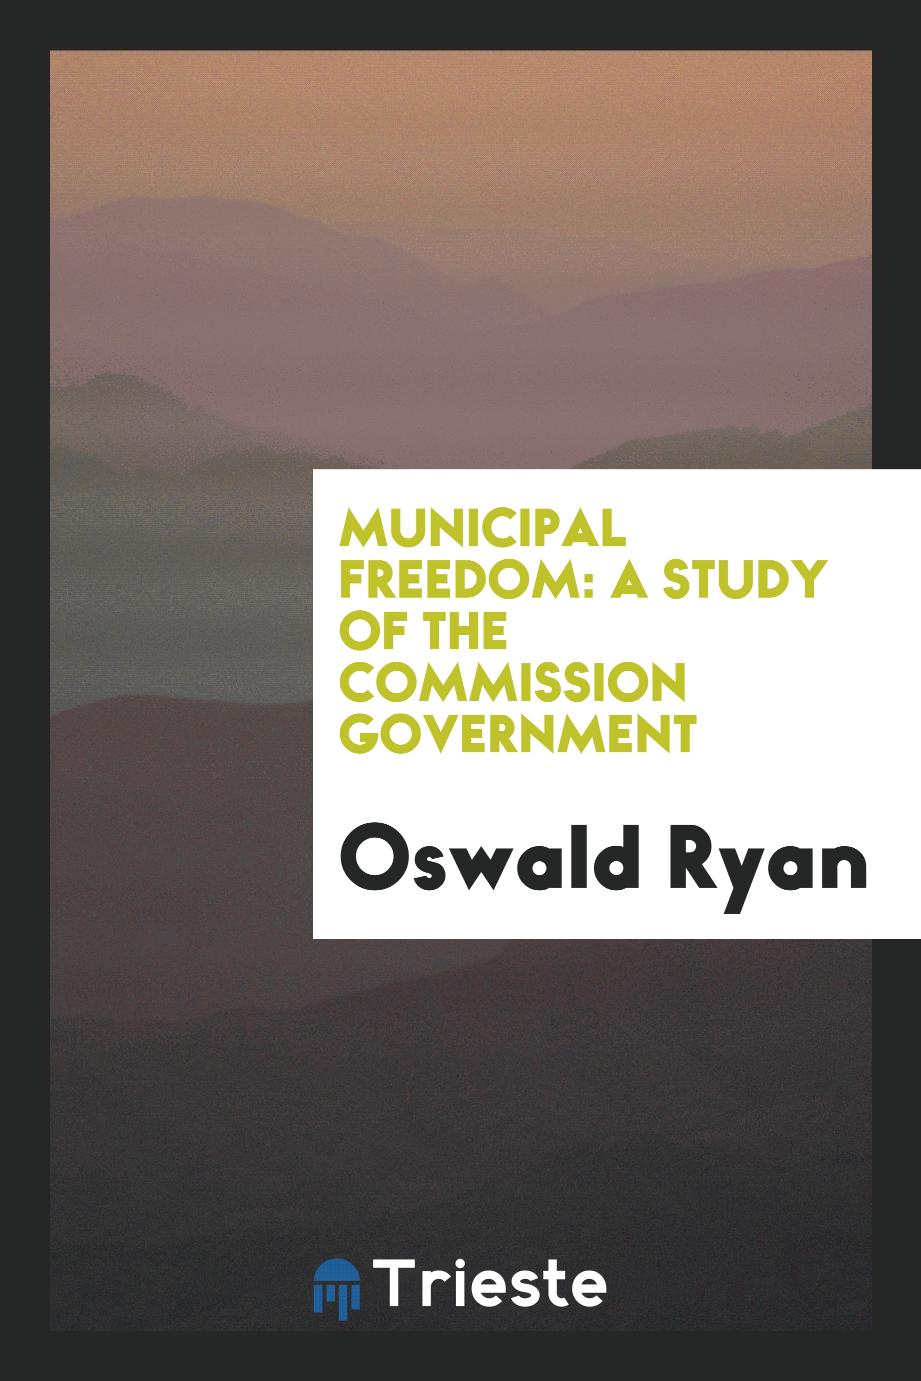 Municipal Freedom: A Study of the Commission Government